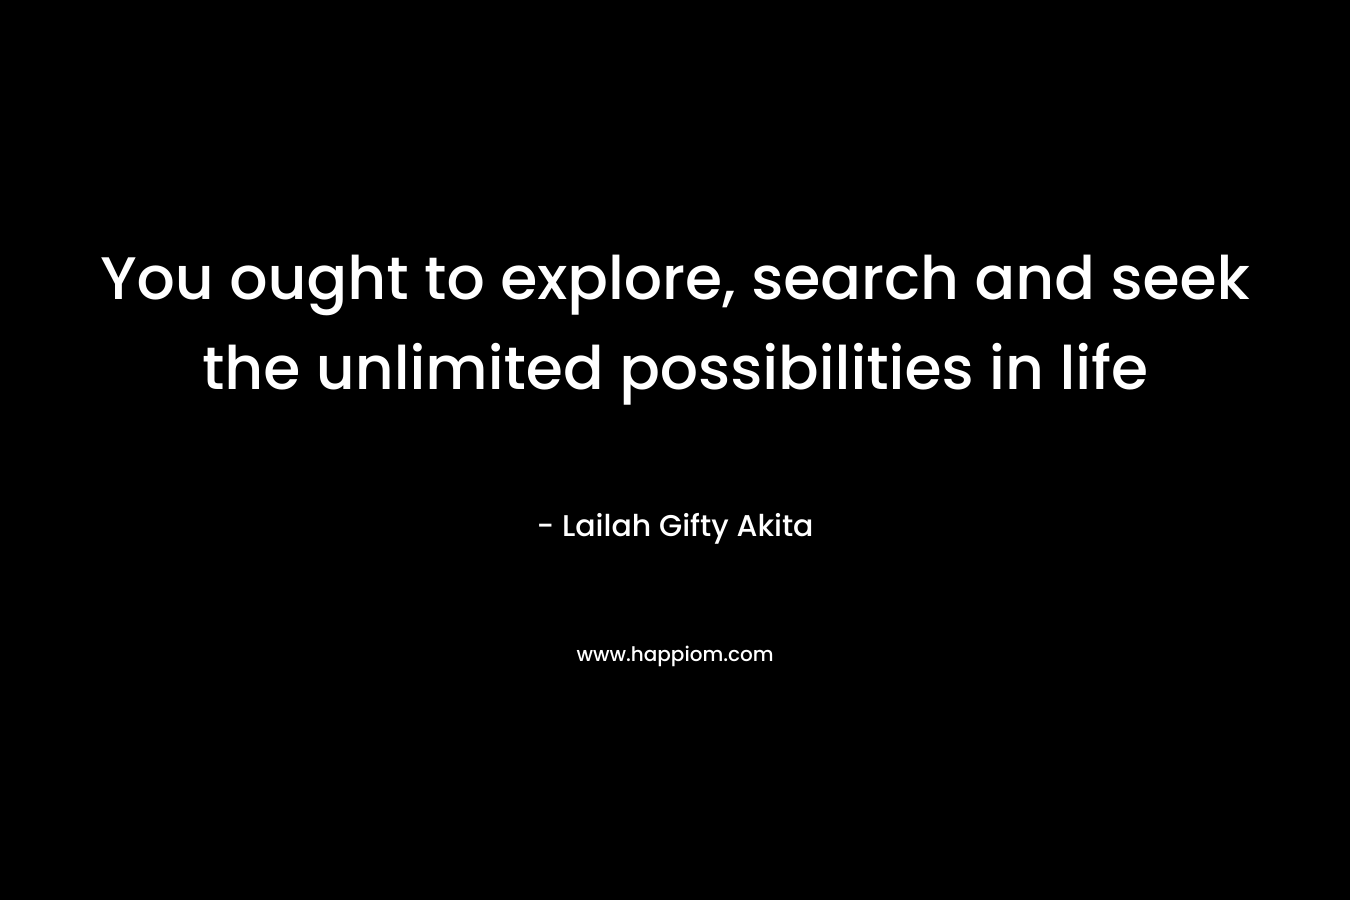 You ought to explore, search and seek the unlimited possibilities in life – Lailah Gifty Akita